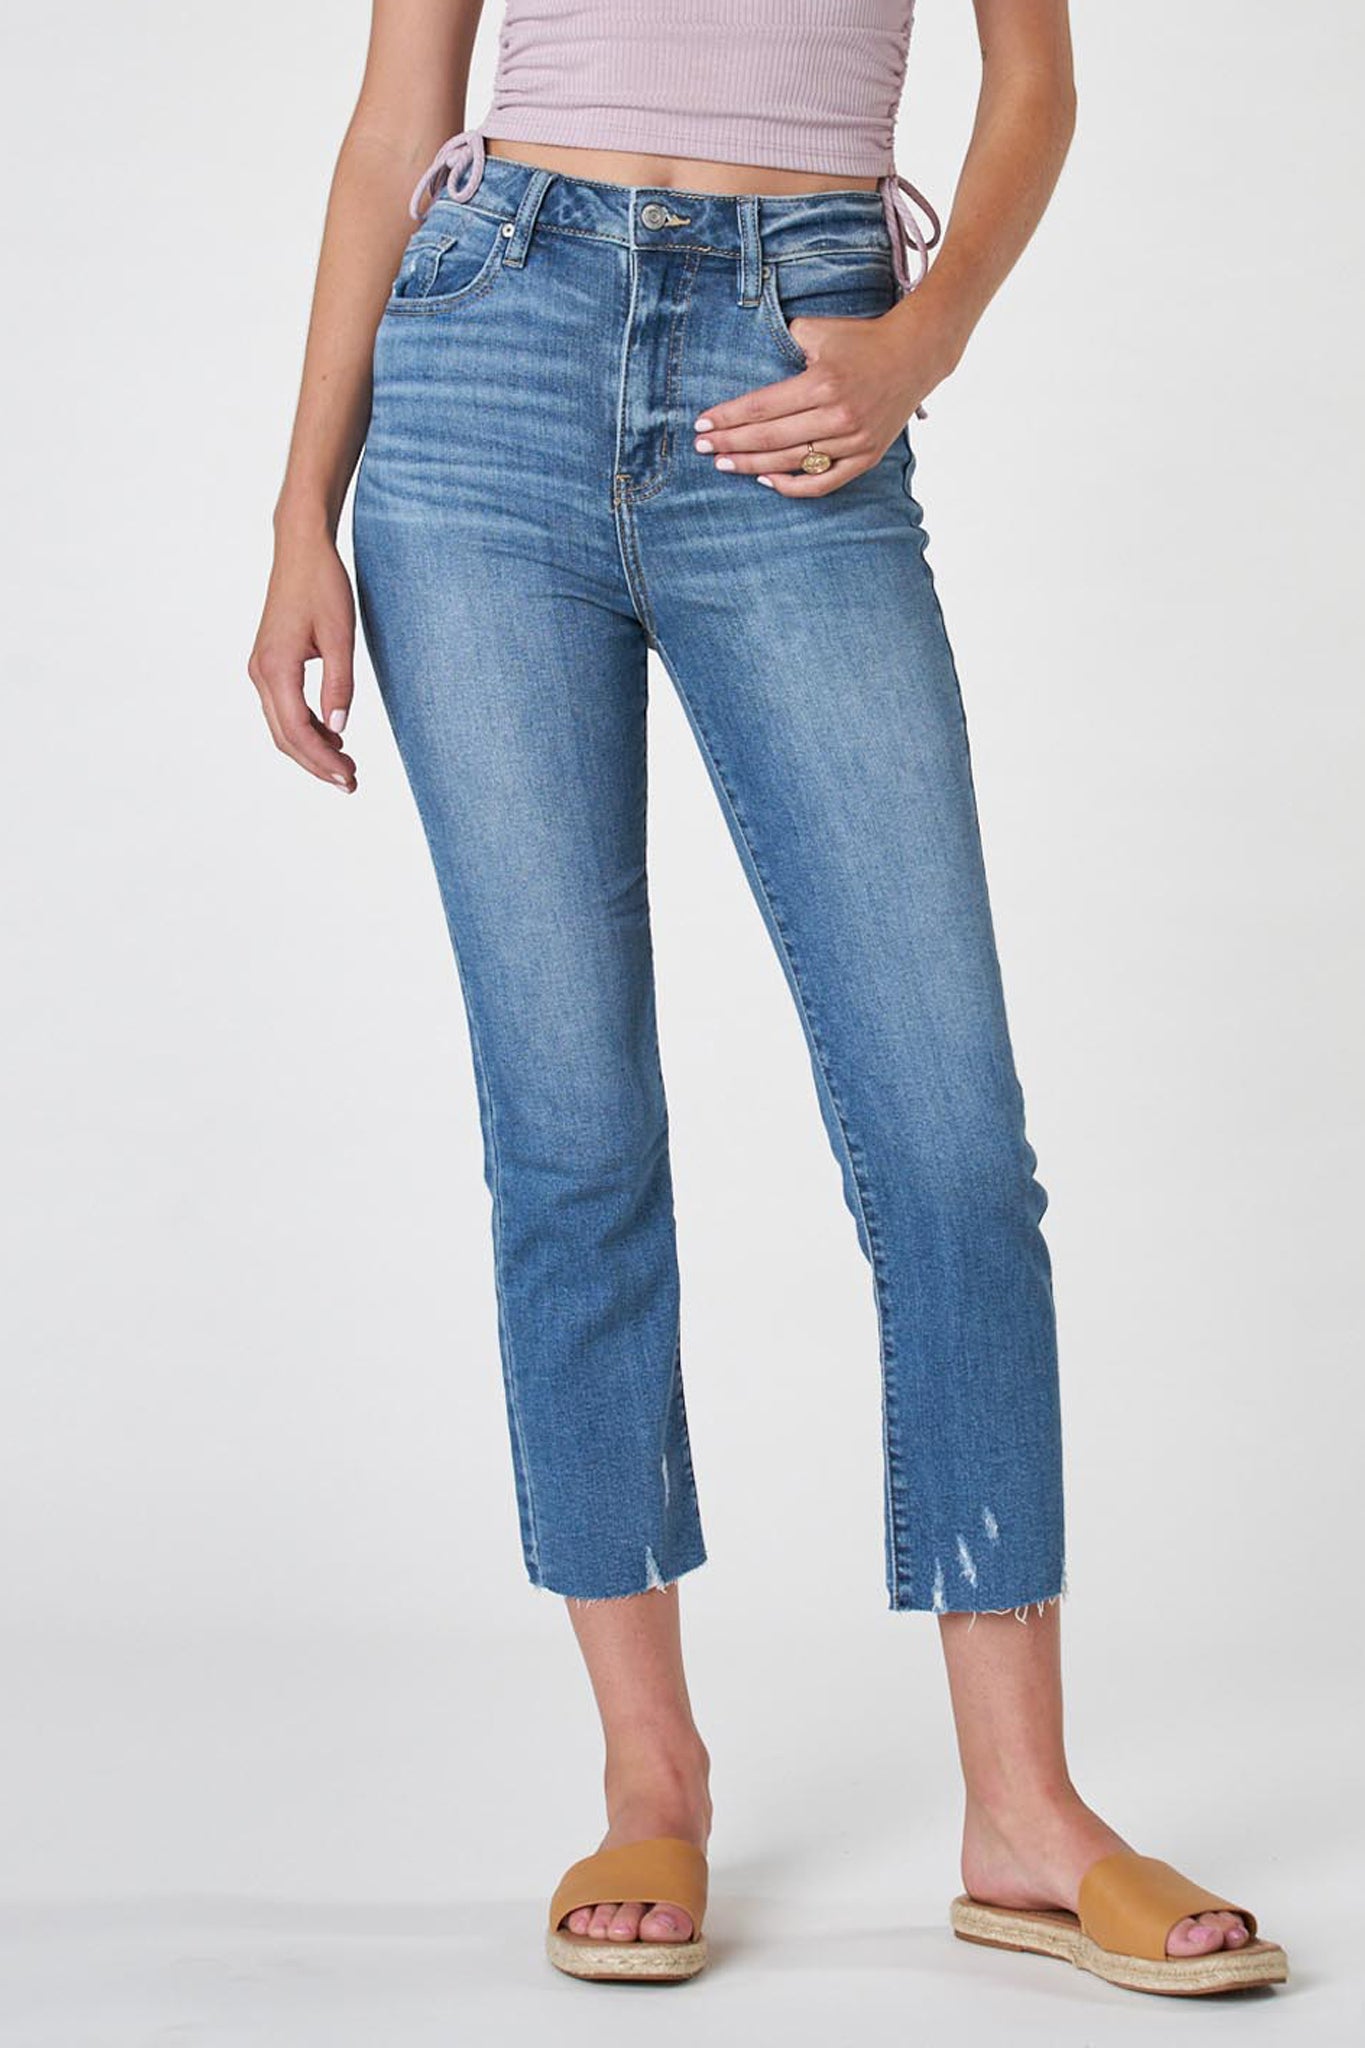 View 1 of Eunina Ally Straight Jeans in Borrego, a Denim from Larrea Cove. Detail: Eunina Ally ultra high rise s...